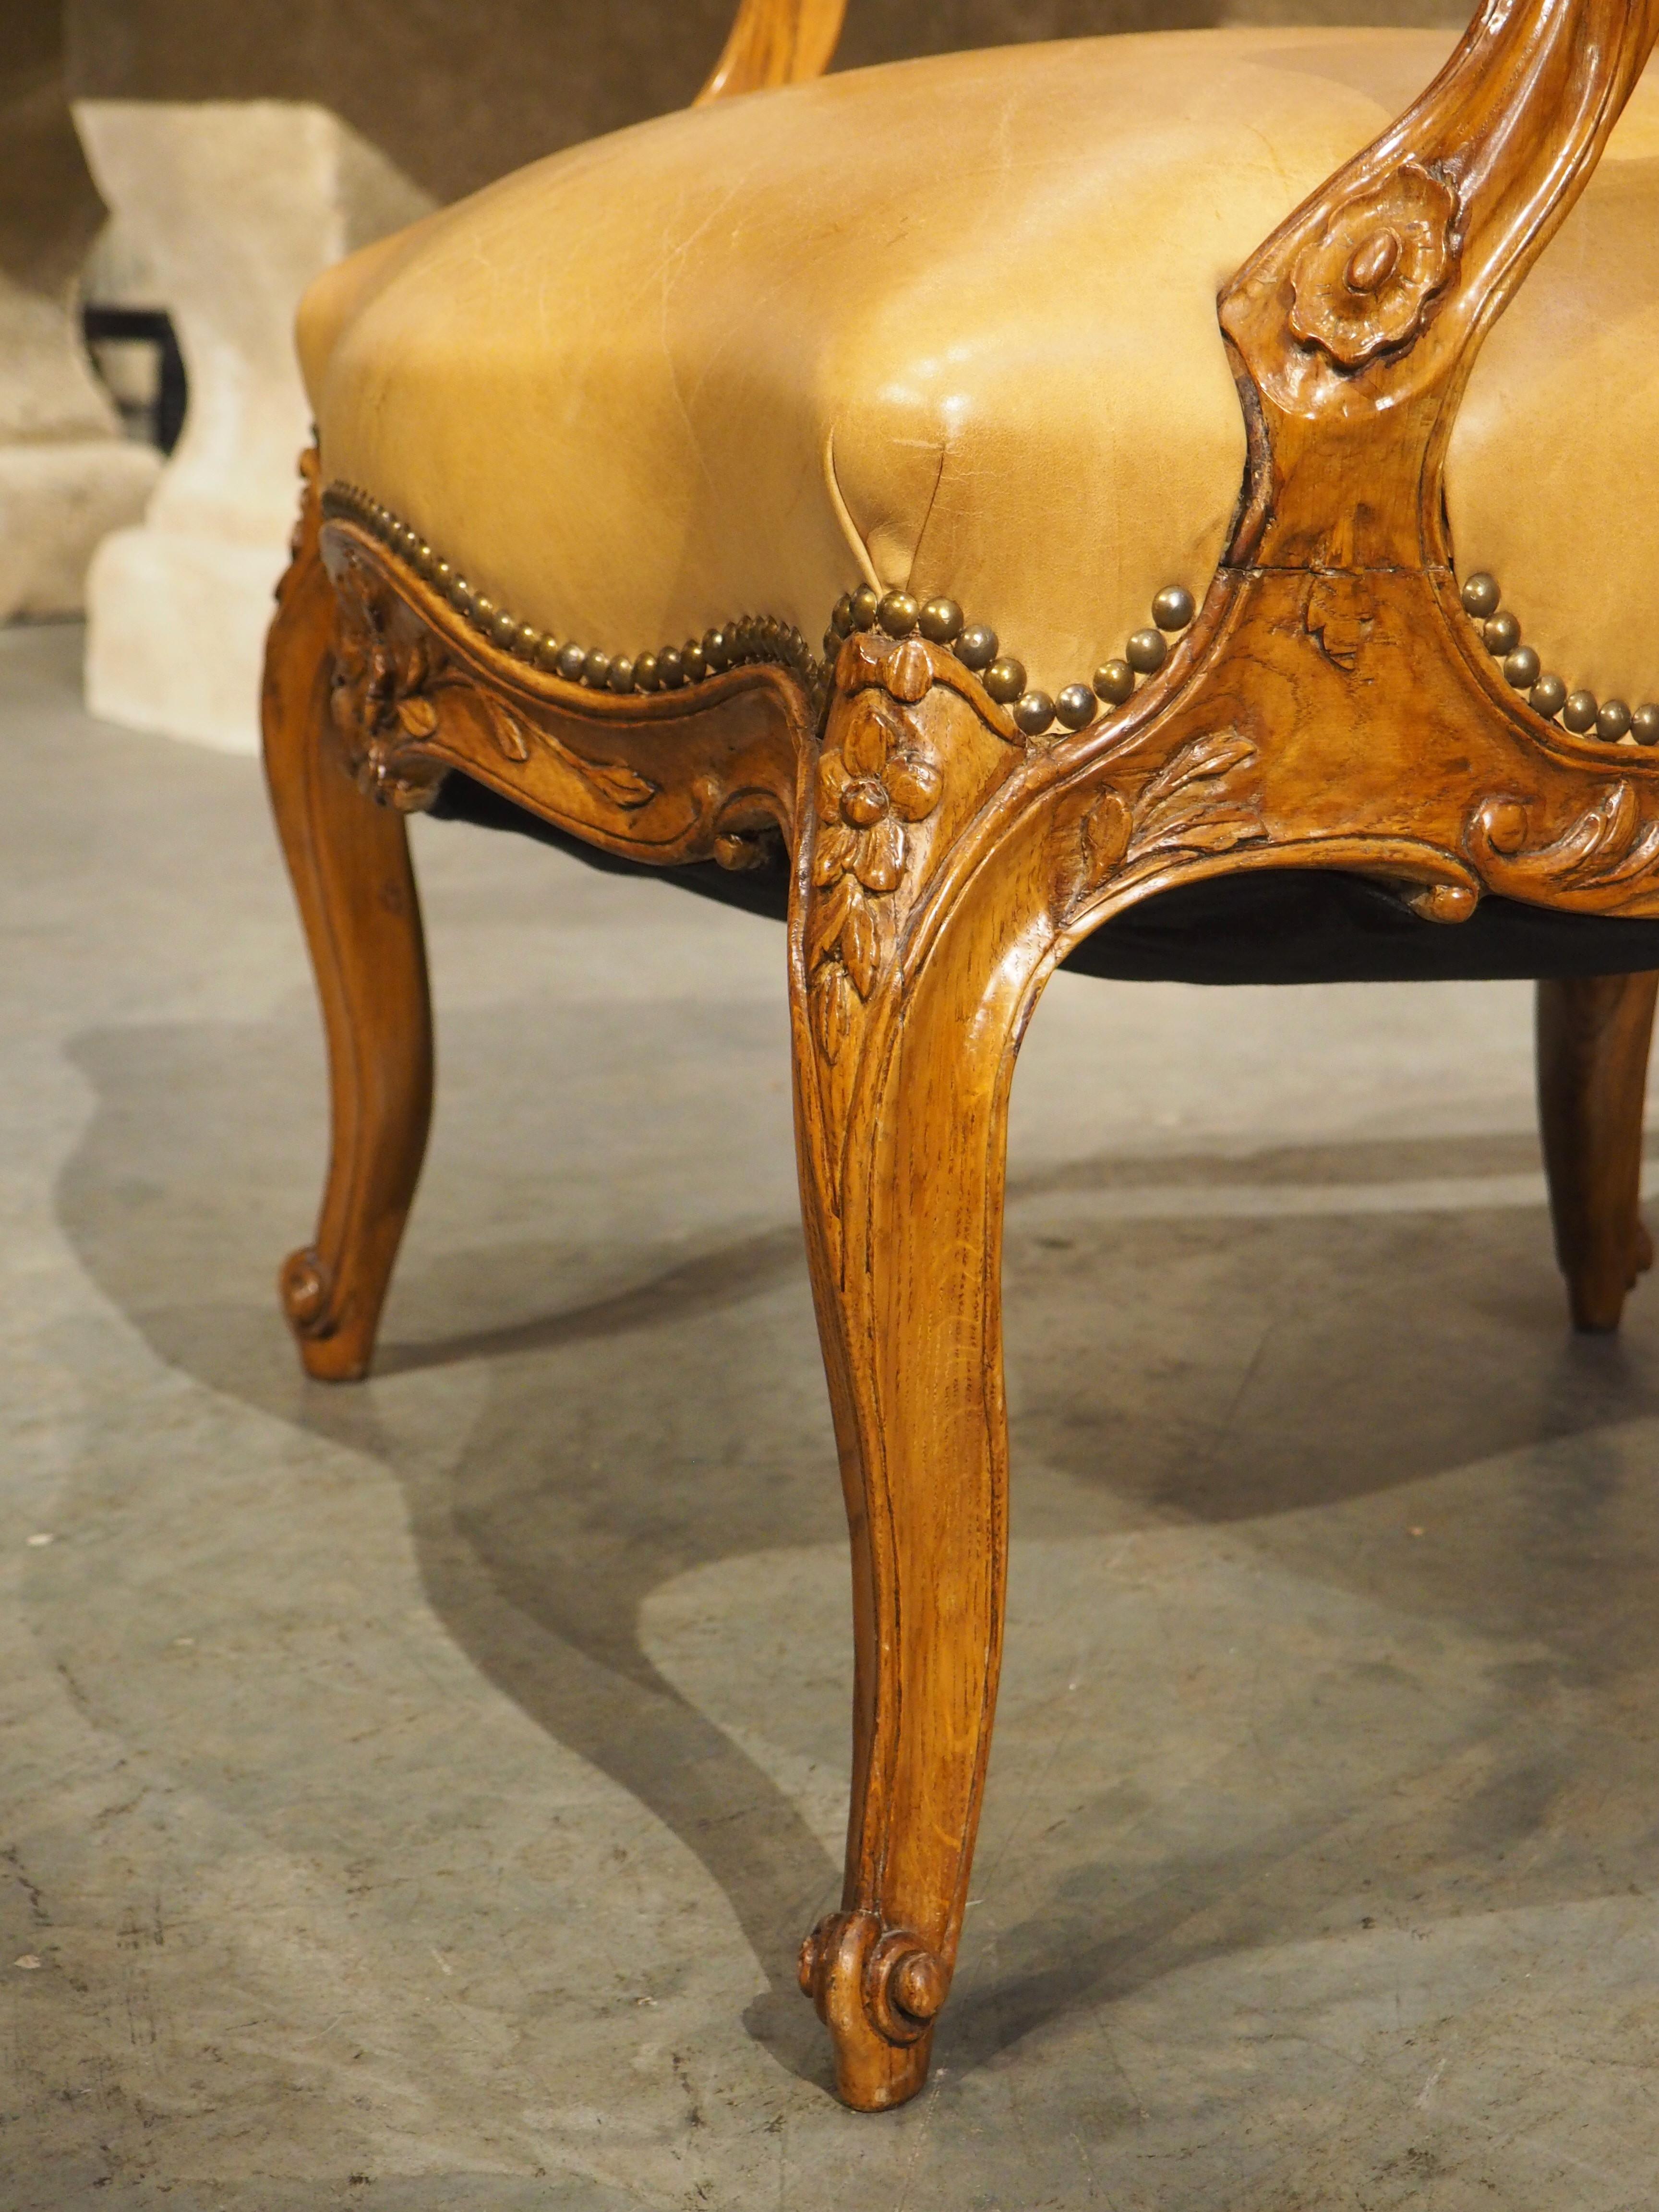 Pair of French Carved Regence Style Armchairs with Leather Upholstery, C. 1900 For Sale 11